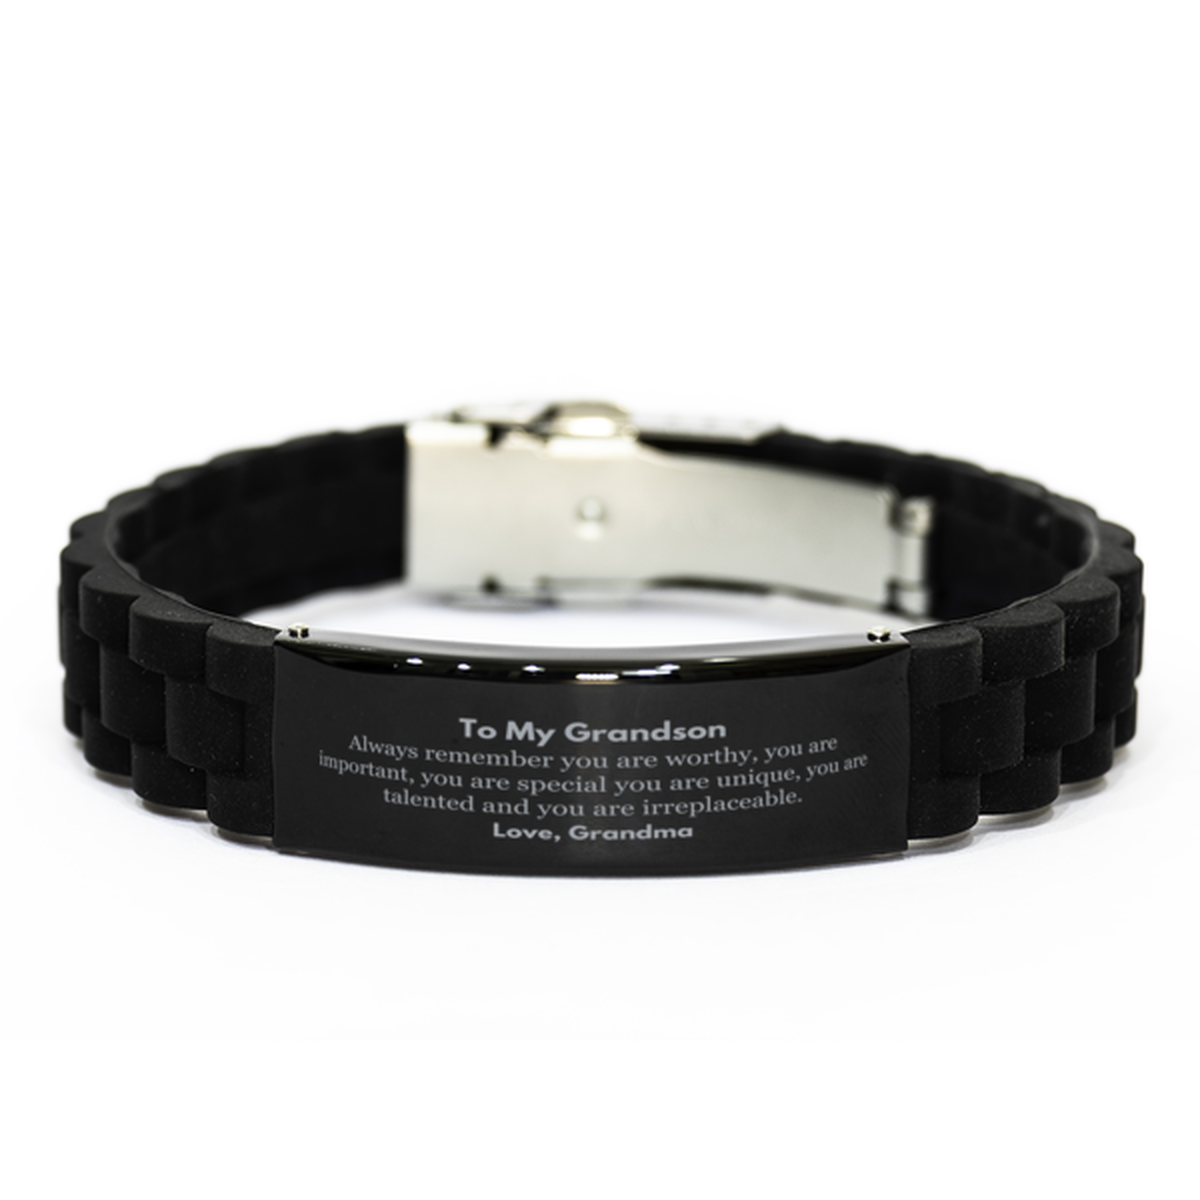 Grandson Birthday Gifts from Grandma, Inspirational Black Glidelock Clasp Bracelet for Grandson Christmas Graduation Gifts for Grandson Always remember you are worthy, you are important. Love, Grandma